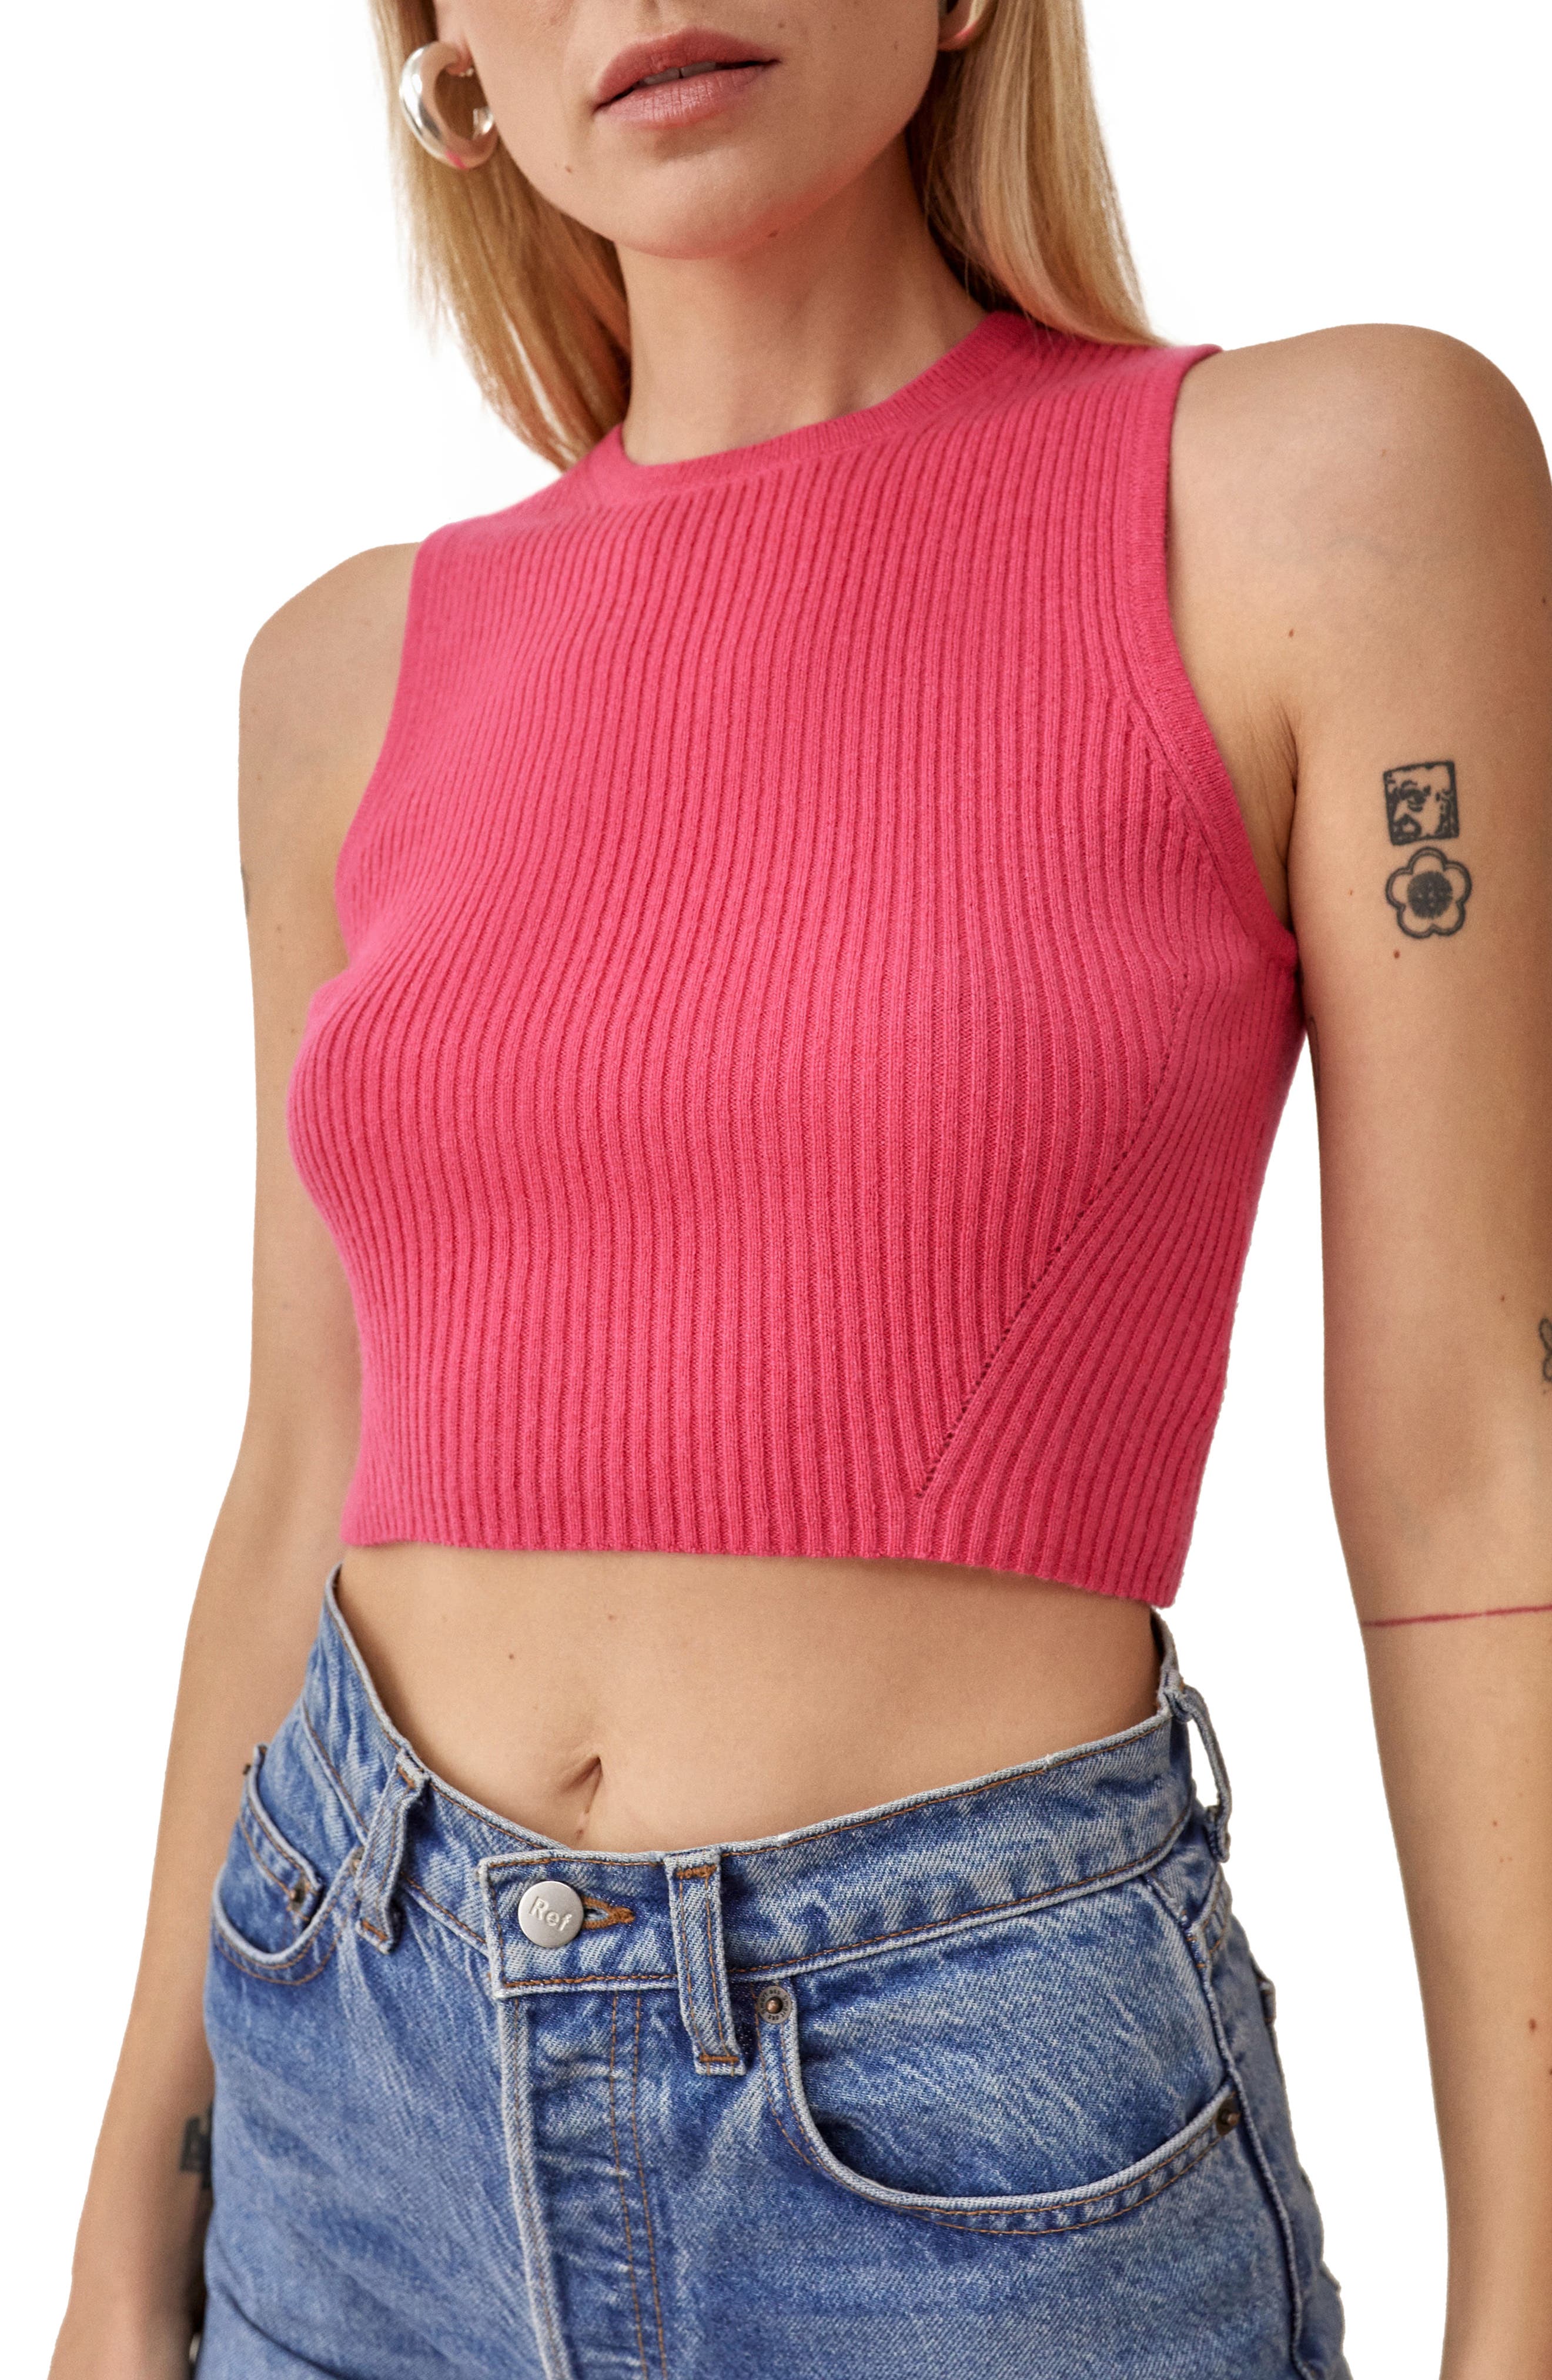 Reformation Bendetta Rib Crop Tank in Flamingo at Nordstrom, Size Small